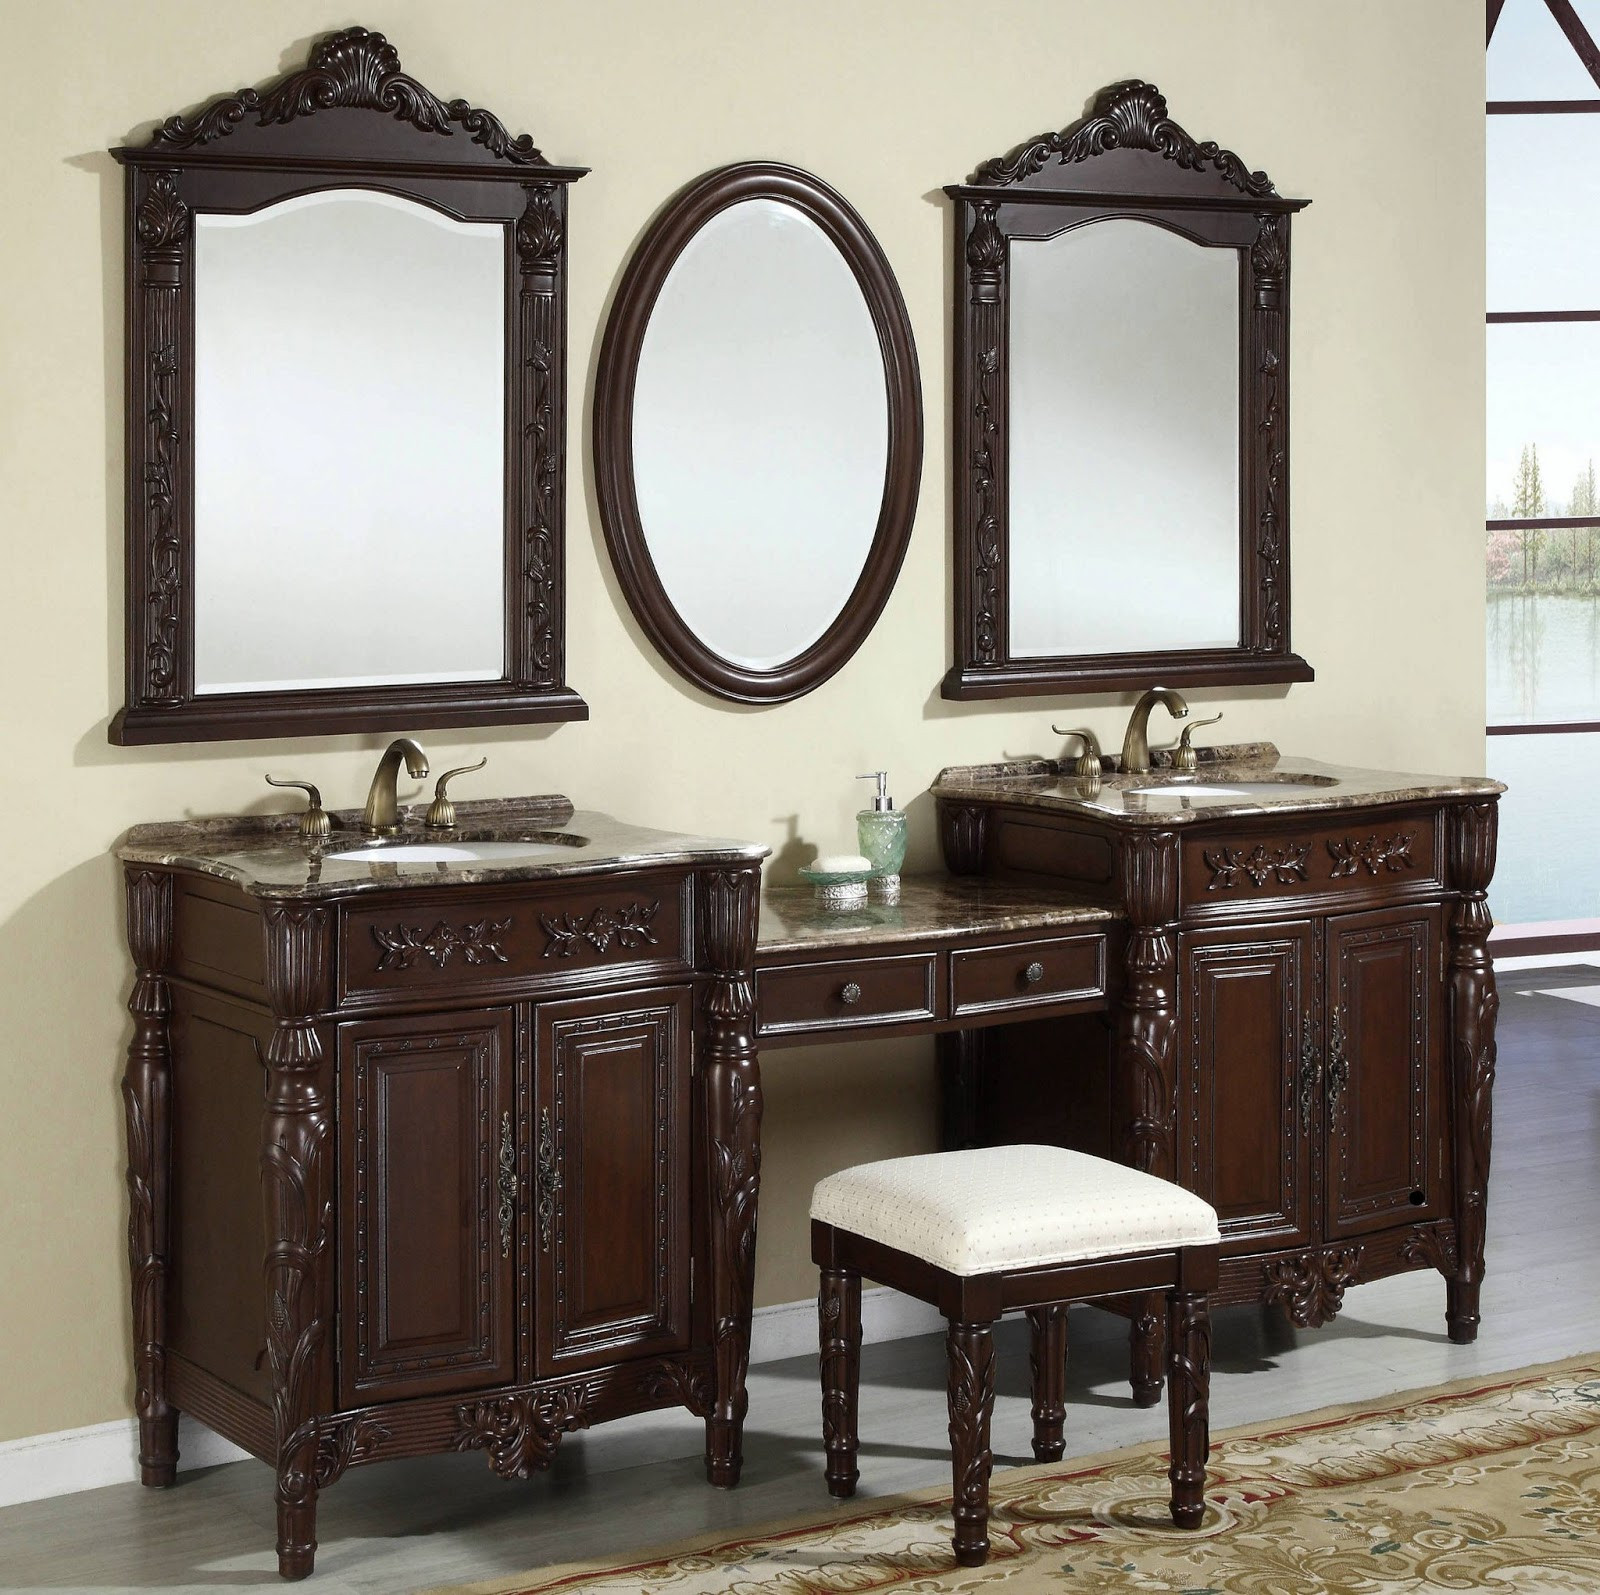 Mirrored Vanities For Bathroom
 Bathroom Vanity Mirrors Models and Buying Tips Cabinets